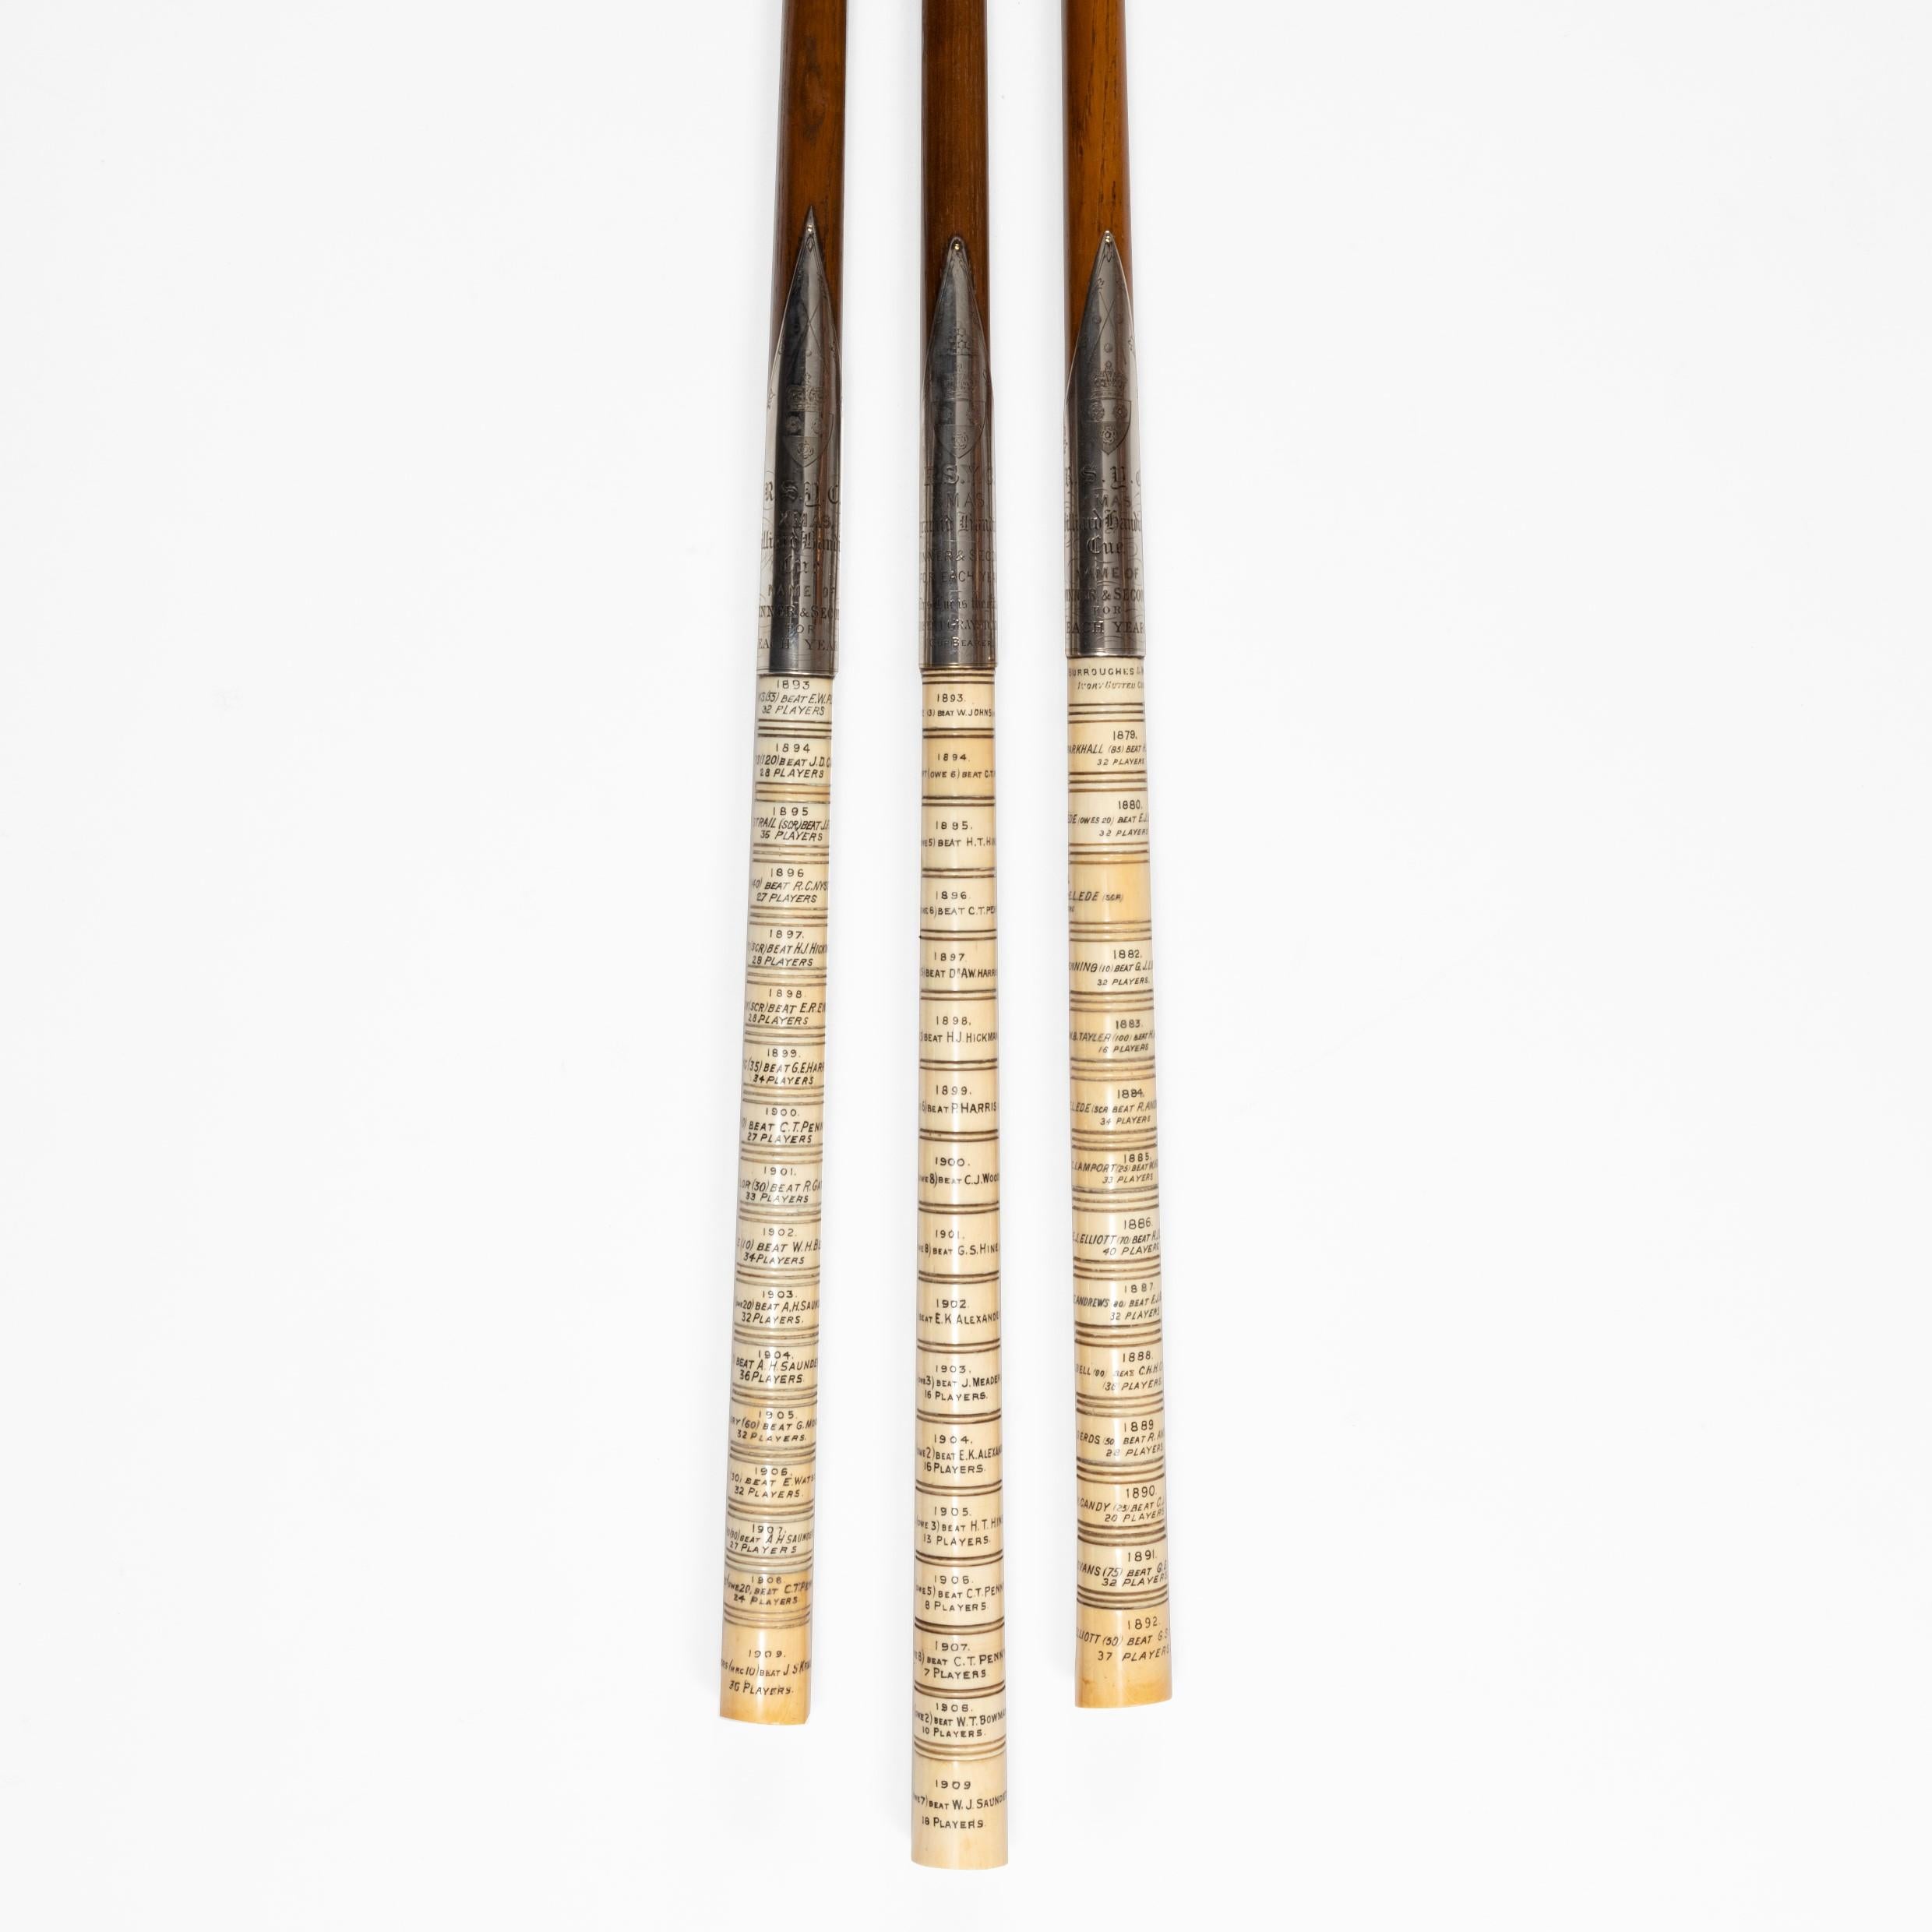 Three oak, silver and ivory trophy billiard cues, dated 1879-1909, the silver collars inscribed ‘R.S.Y.C. Christmas Billiards Handicap’ and ‘R.S.Y.C. Christmas Pyramid Handicap, Burroughes & Watts,’ and the handles comprising an ivory ring with the